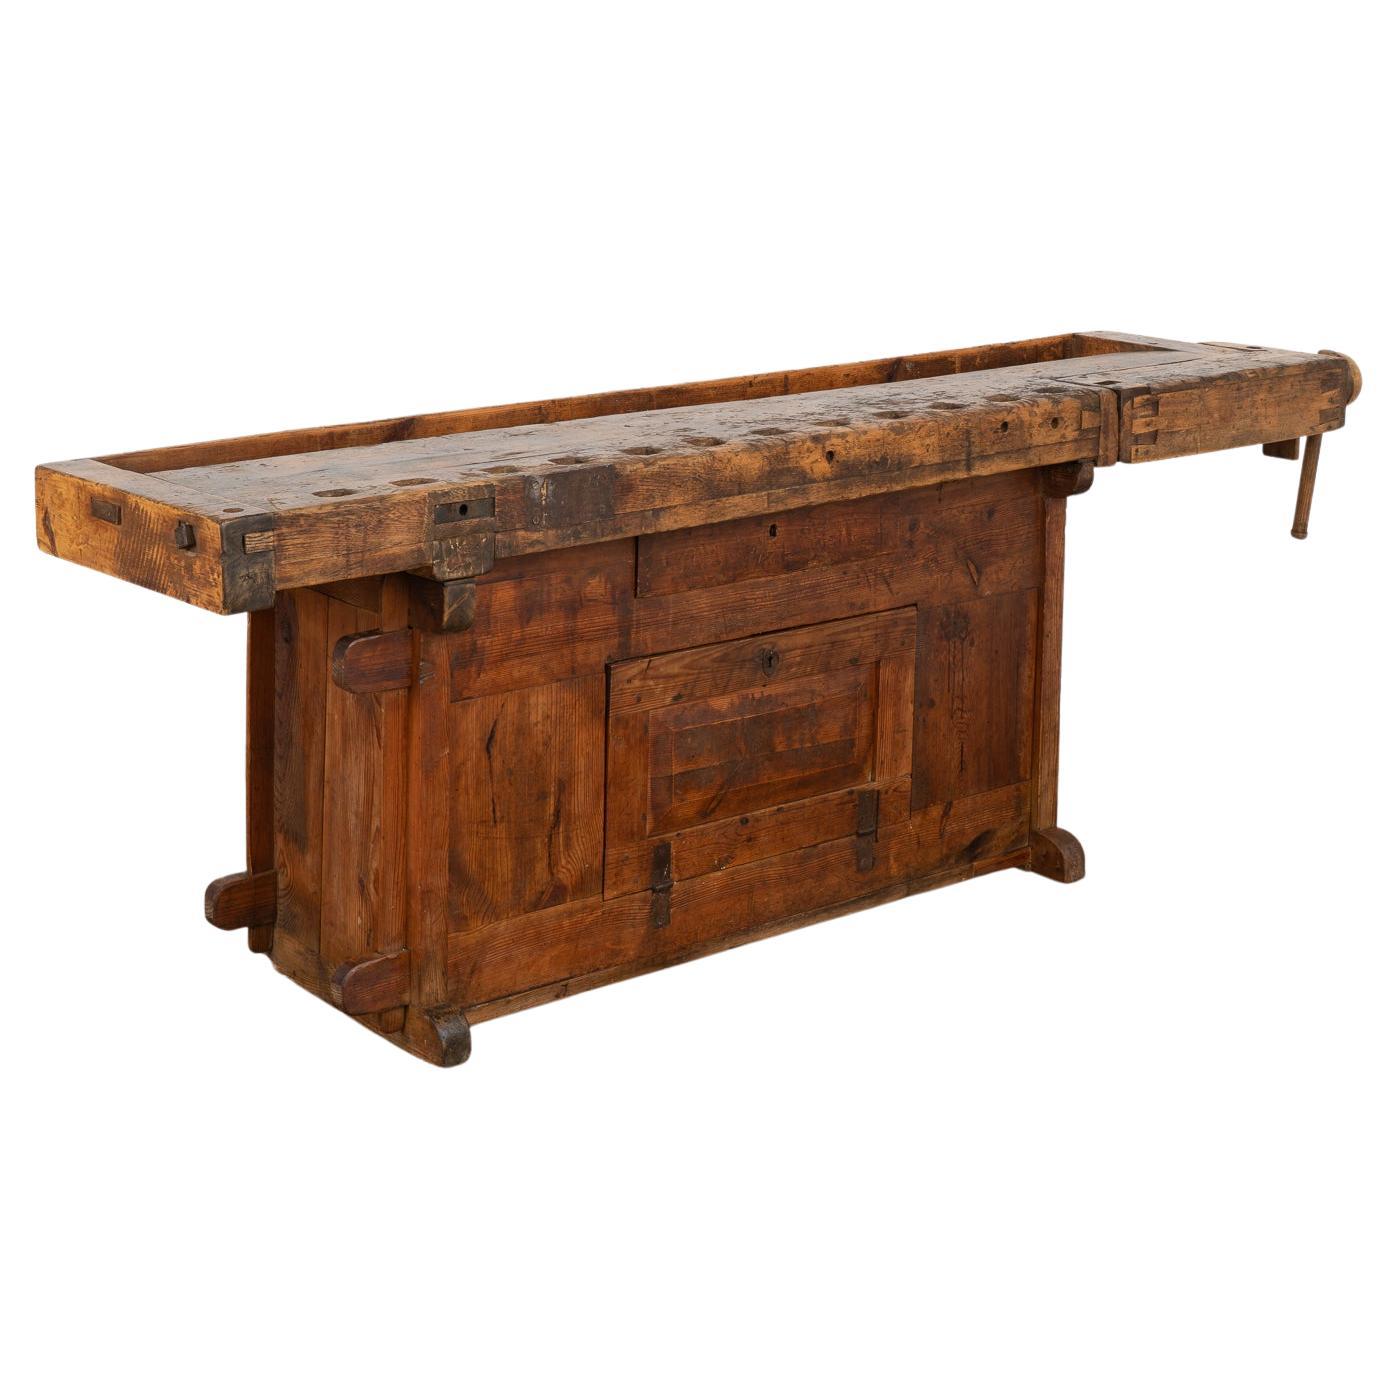 Antique Carpenters Workbench Rustic Console Table with Cabinet, circa 1890